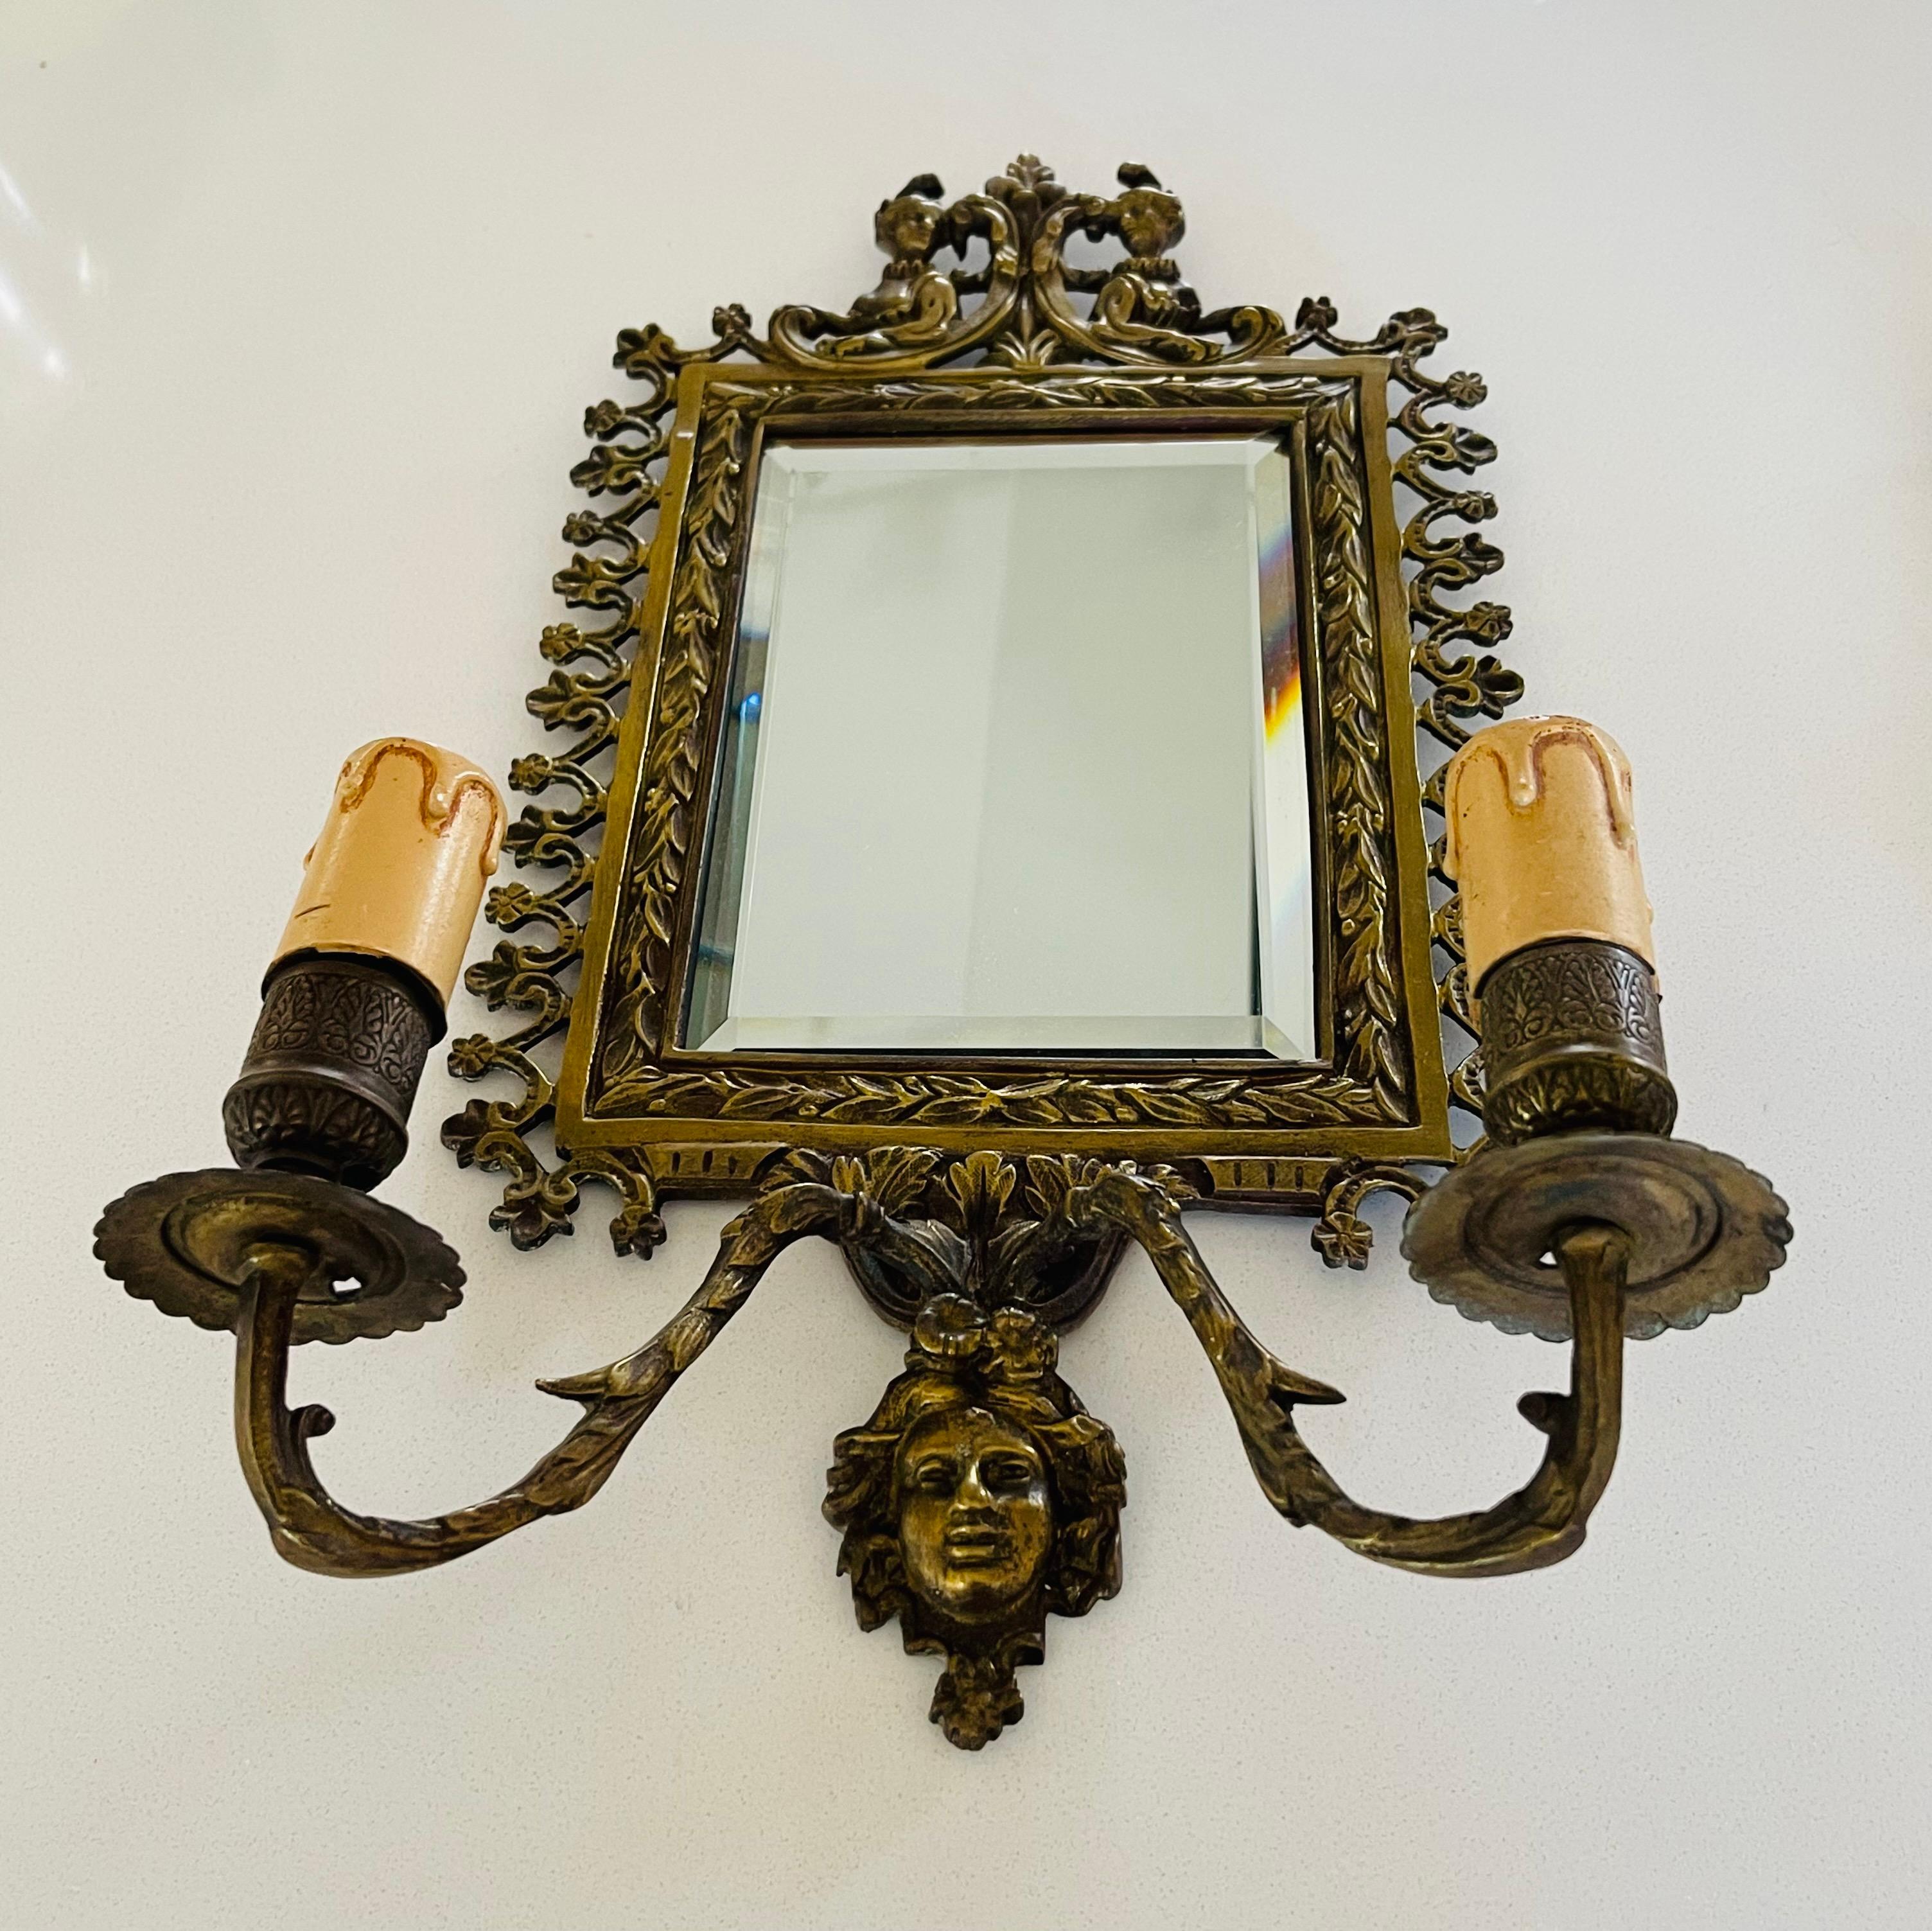 Pair of Napoleon III style bronze sconces. Bevelled mirror, two branches of lights. The bronze is worked and decorated with two women on the upper part of the cornice, and a face on the lower part.